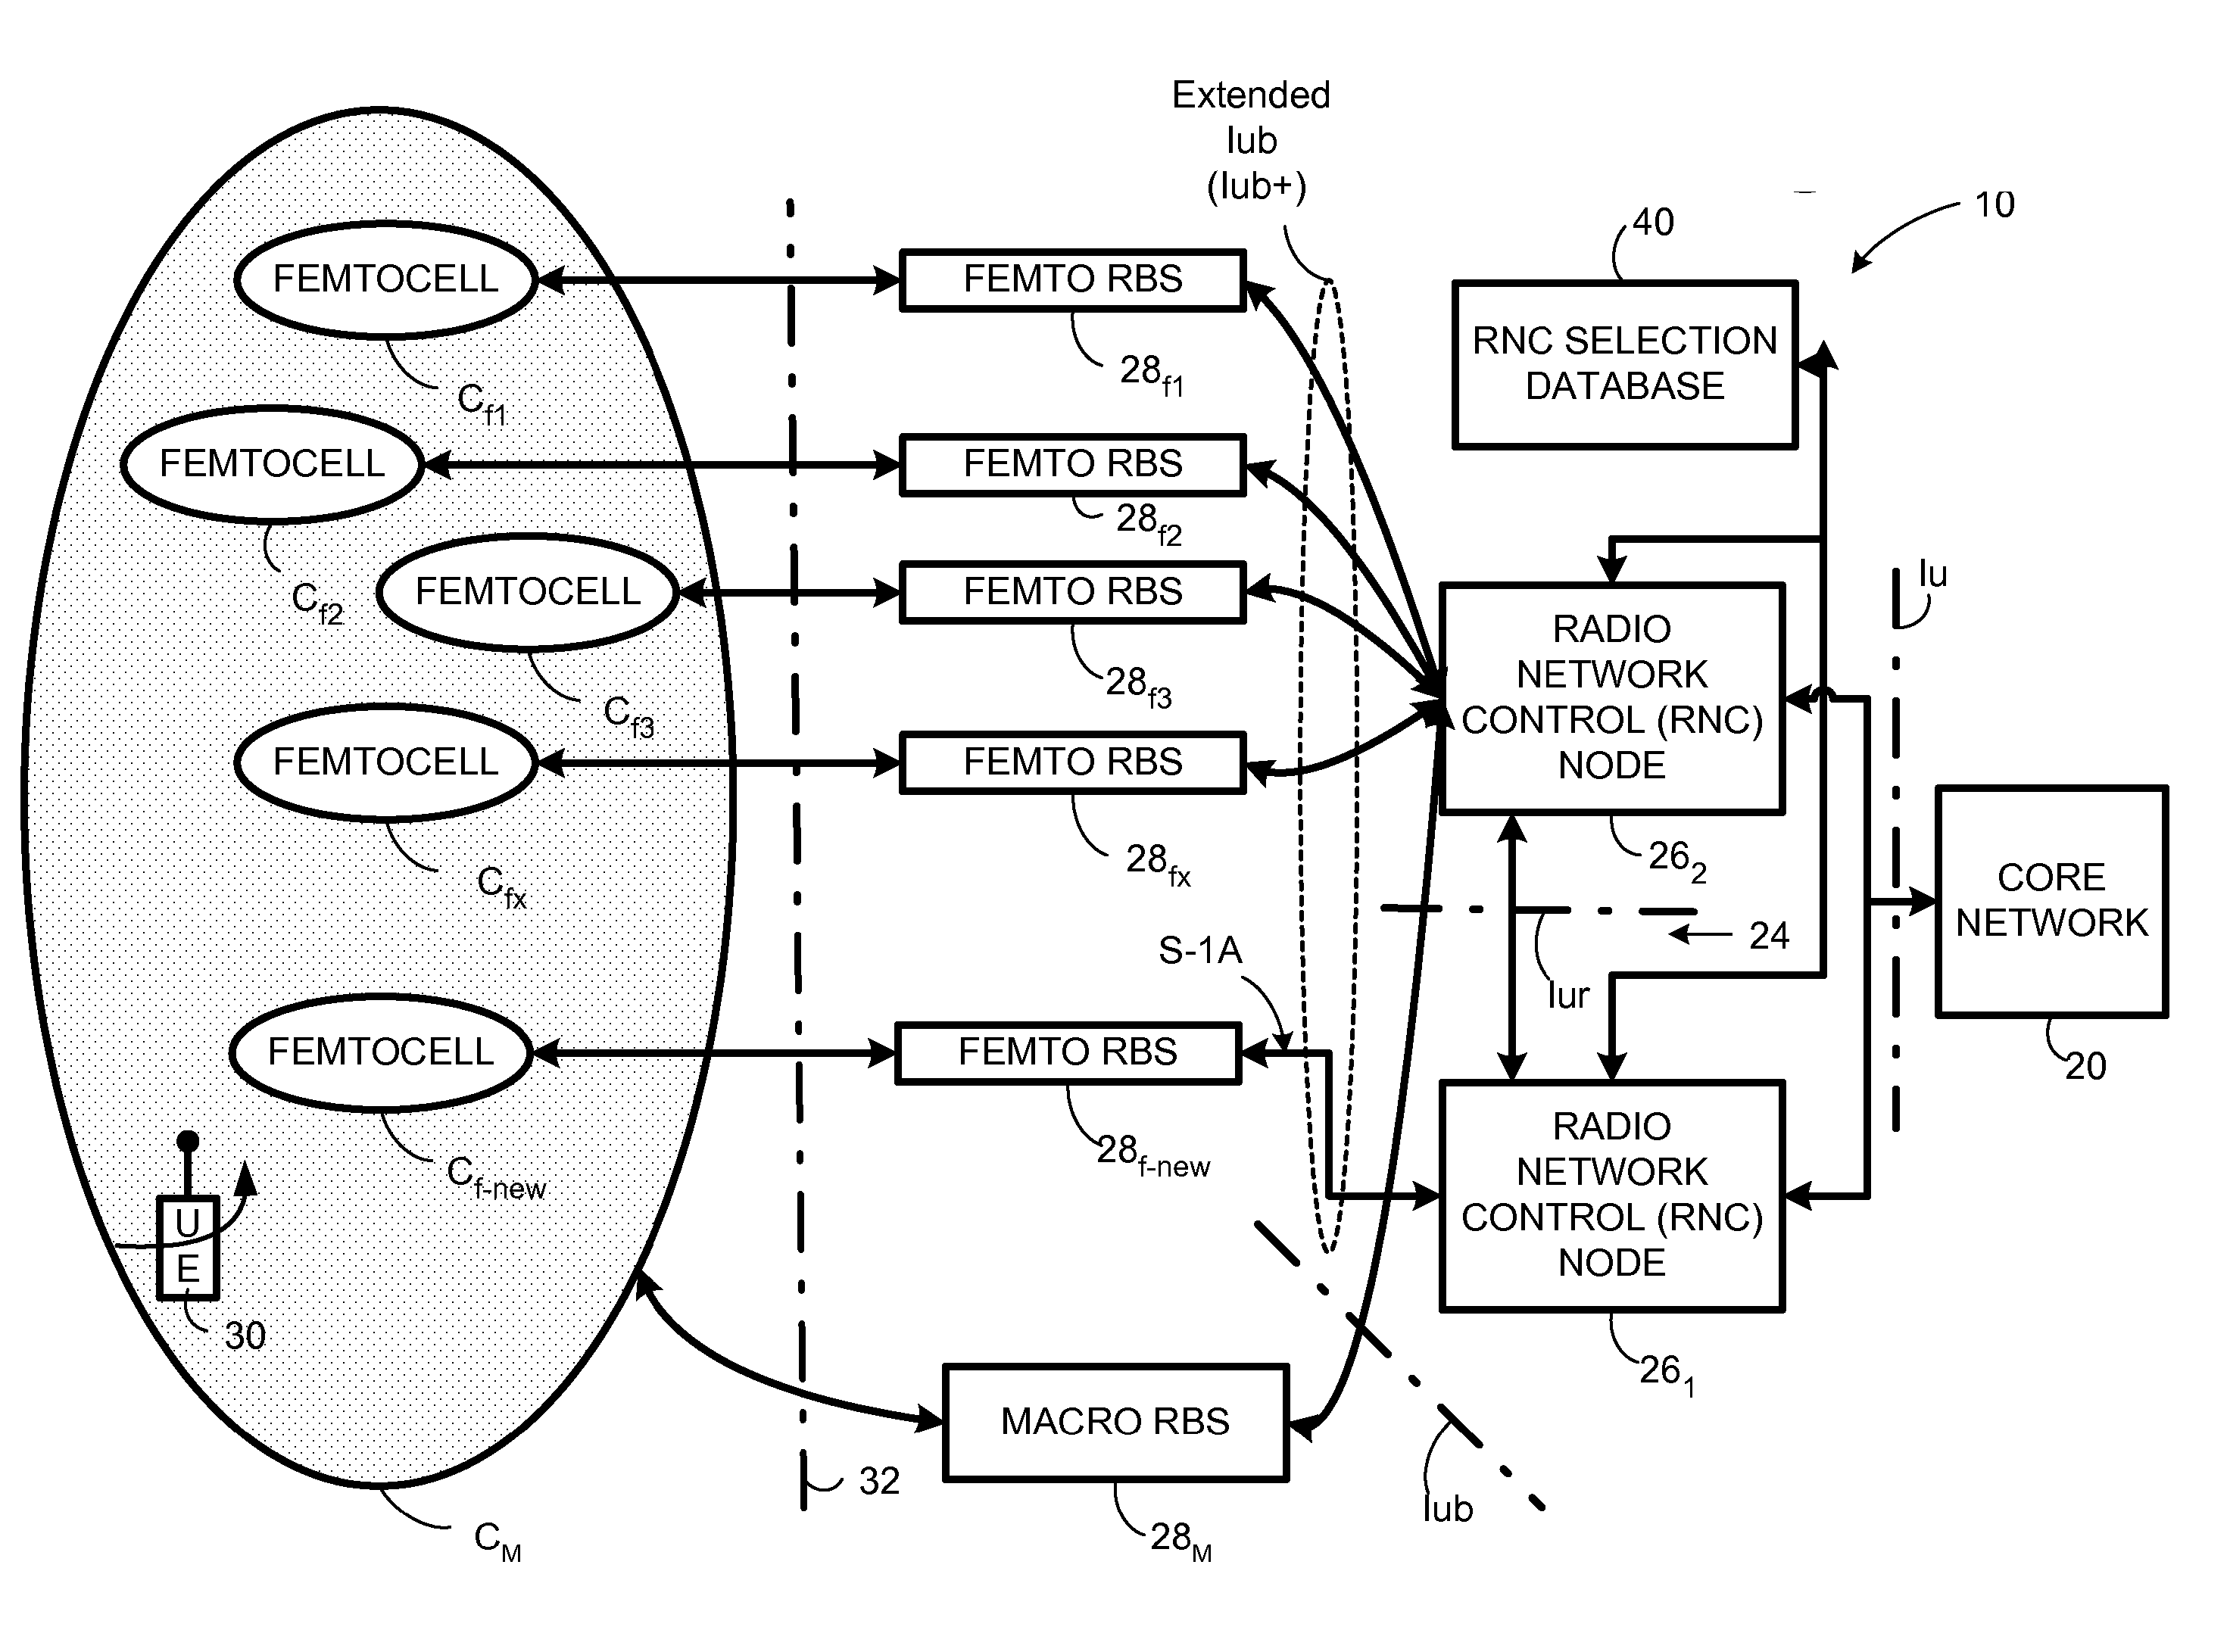 Redirection of ip-connected radio base station to correct control node